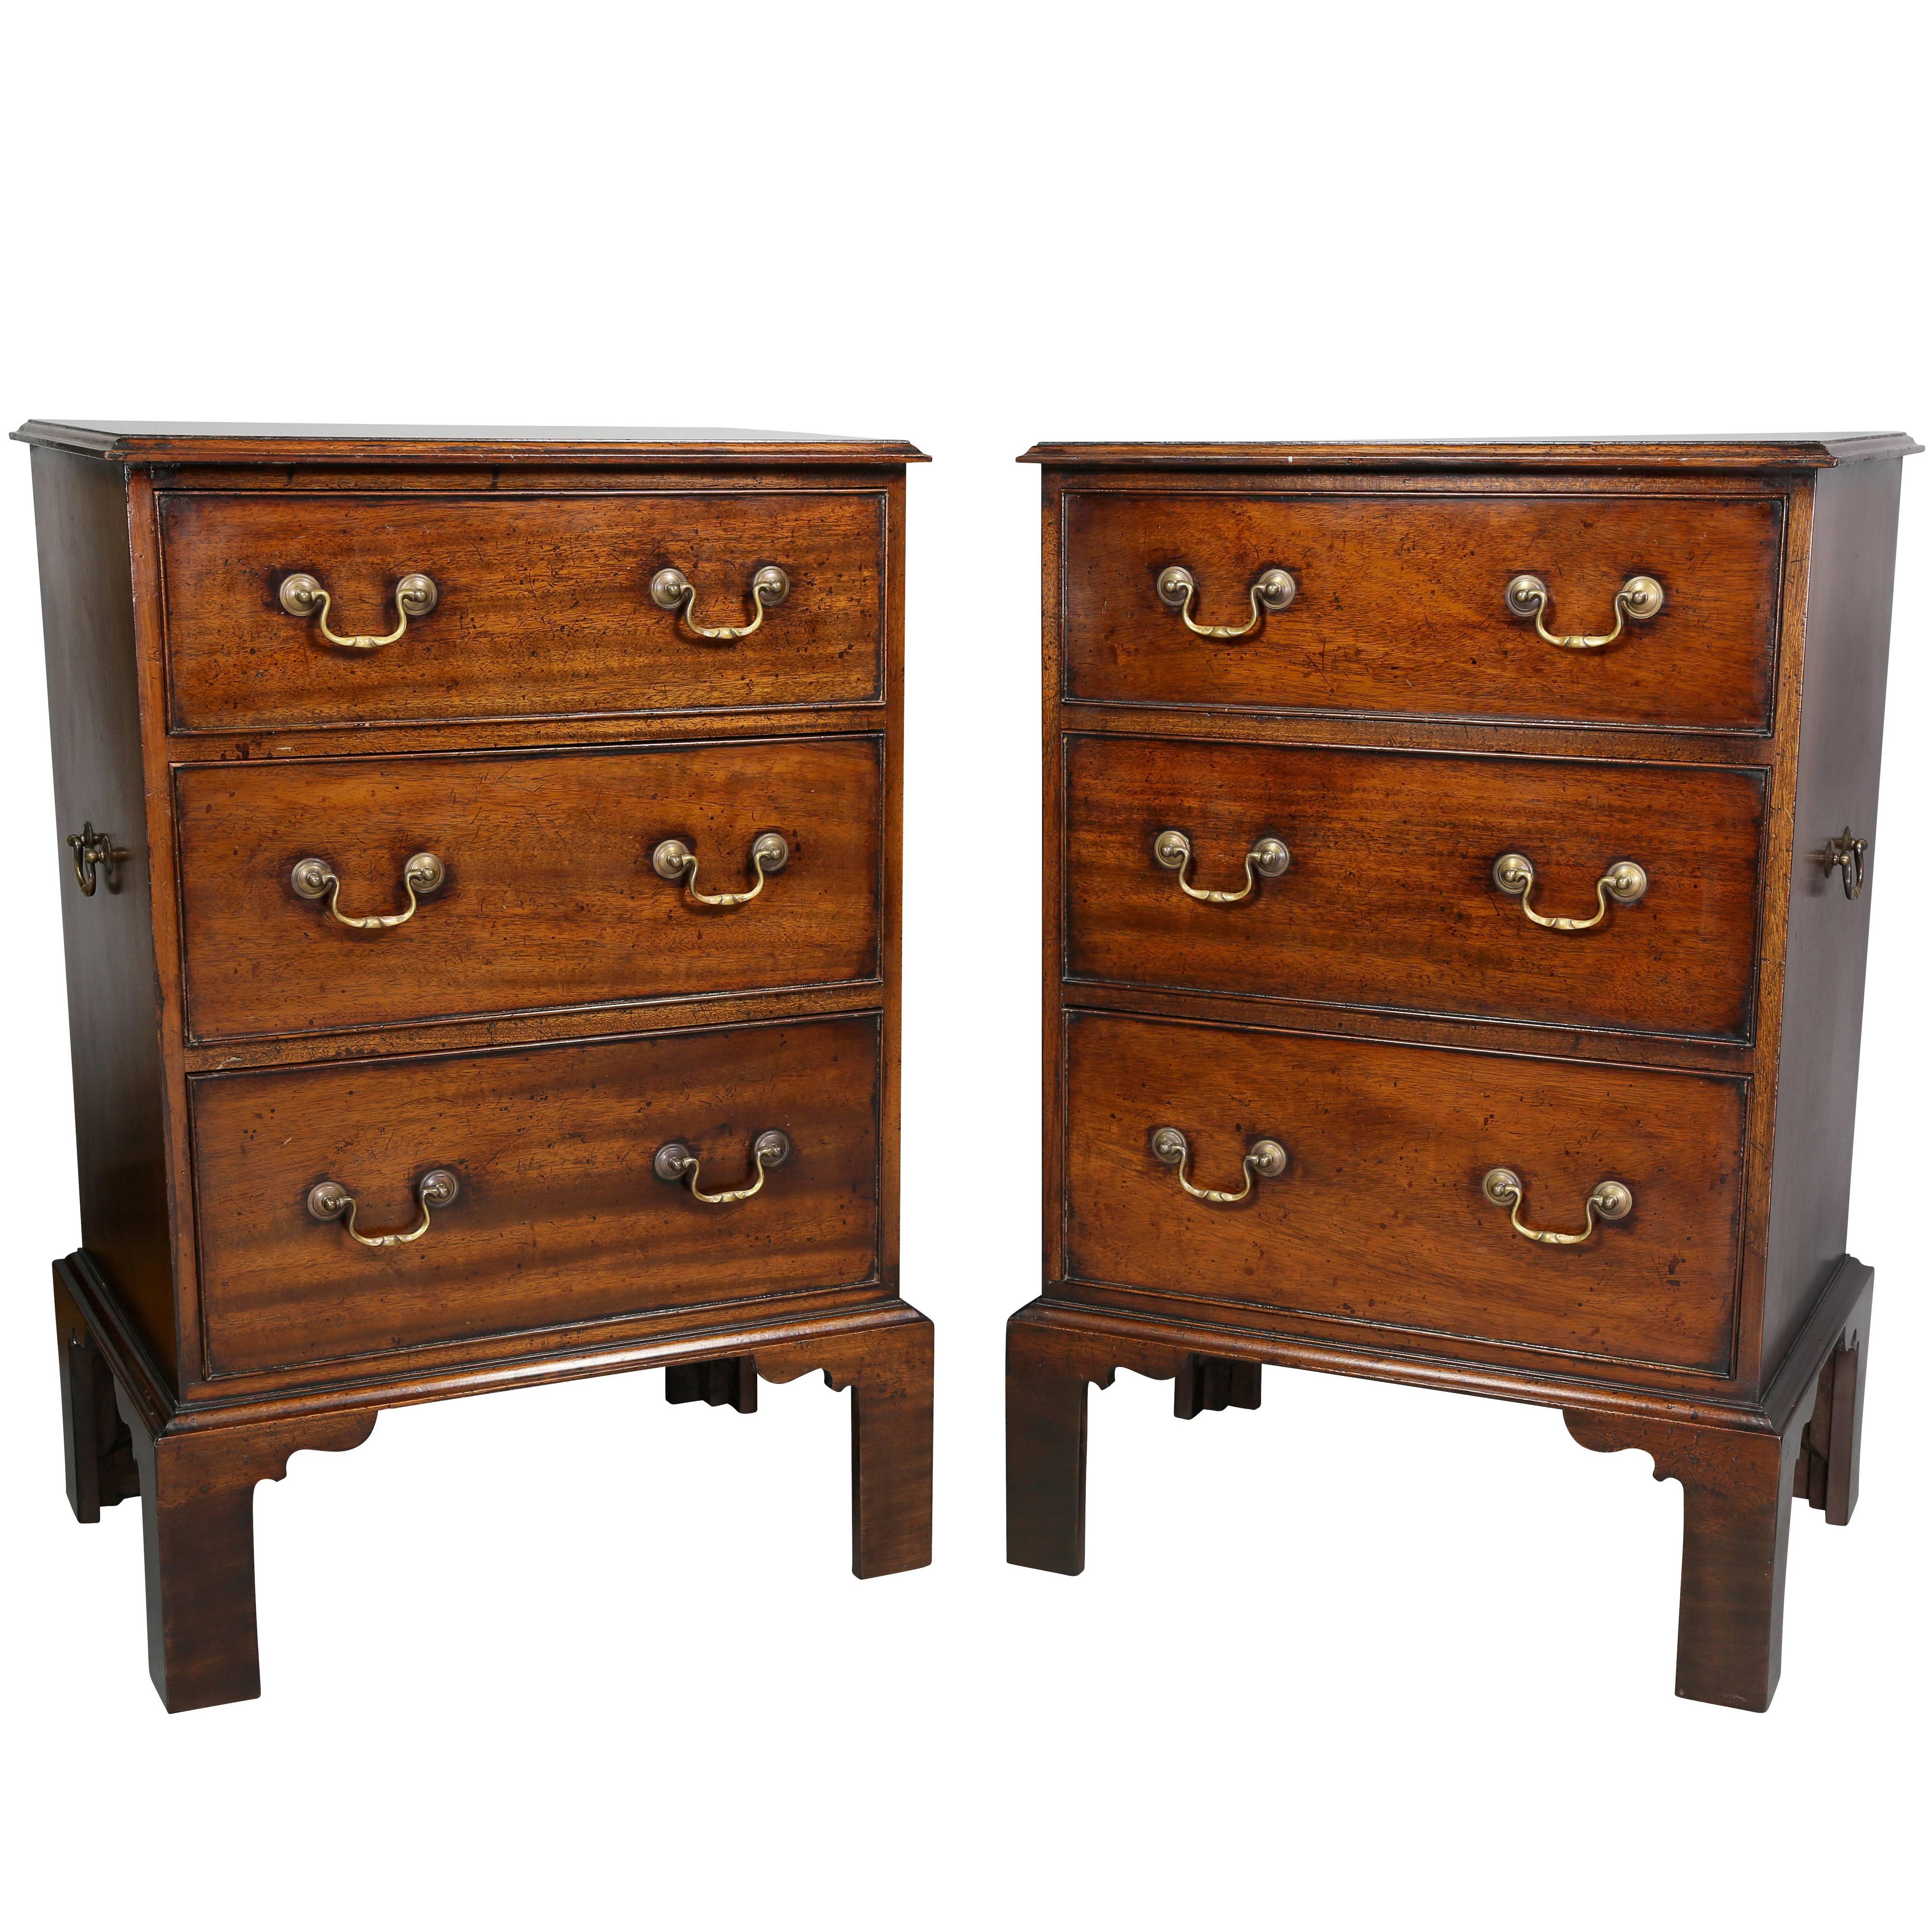 Pair Of George III Style Mahogany Dwarf Chests Of Drawers